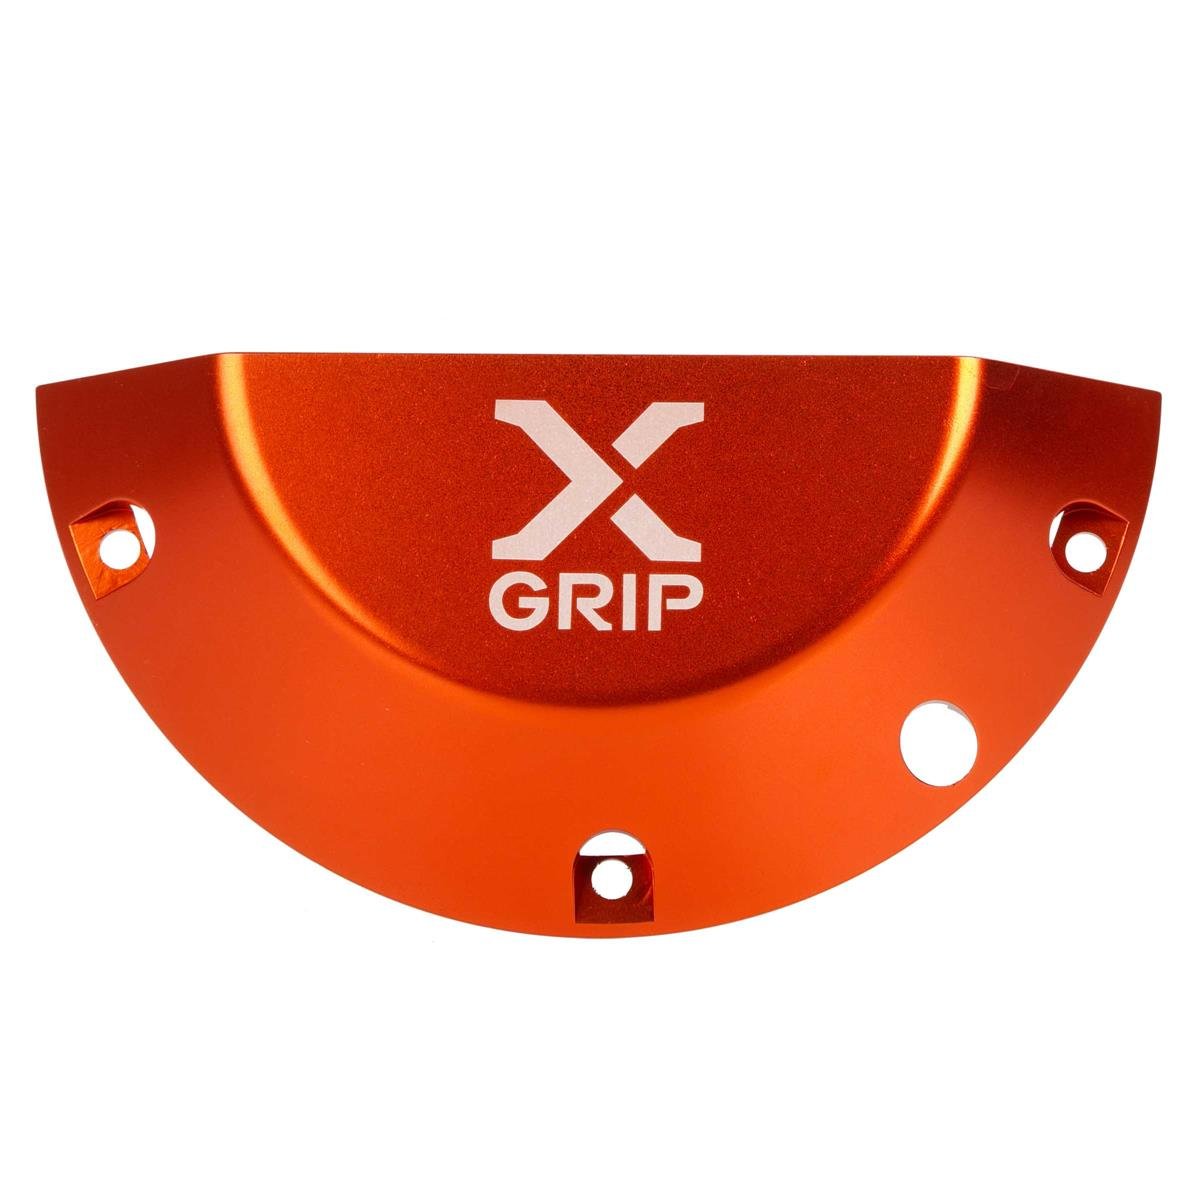 X-Grip Protection Embrayage Clutch Cover Guard KTM EXC 250/300 TPI 17-, Orange